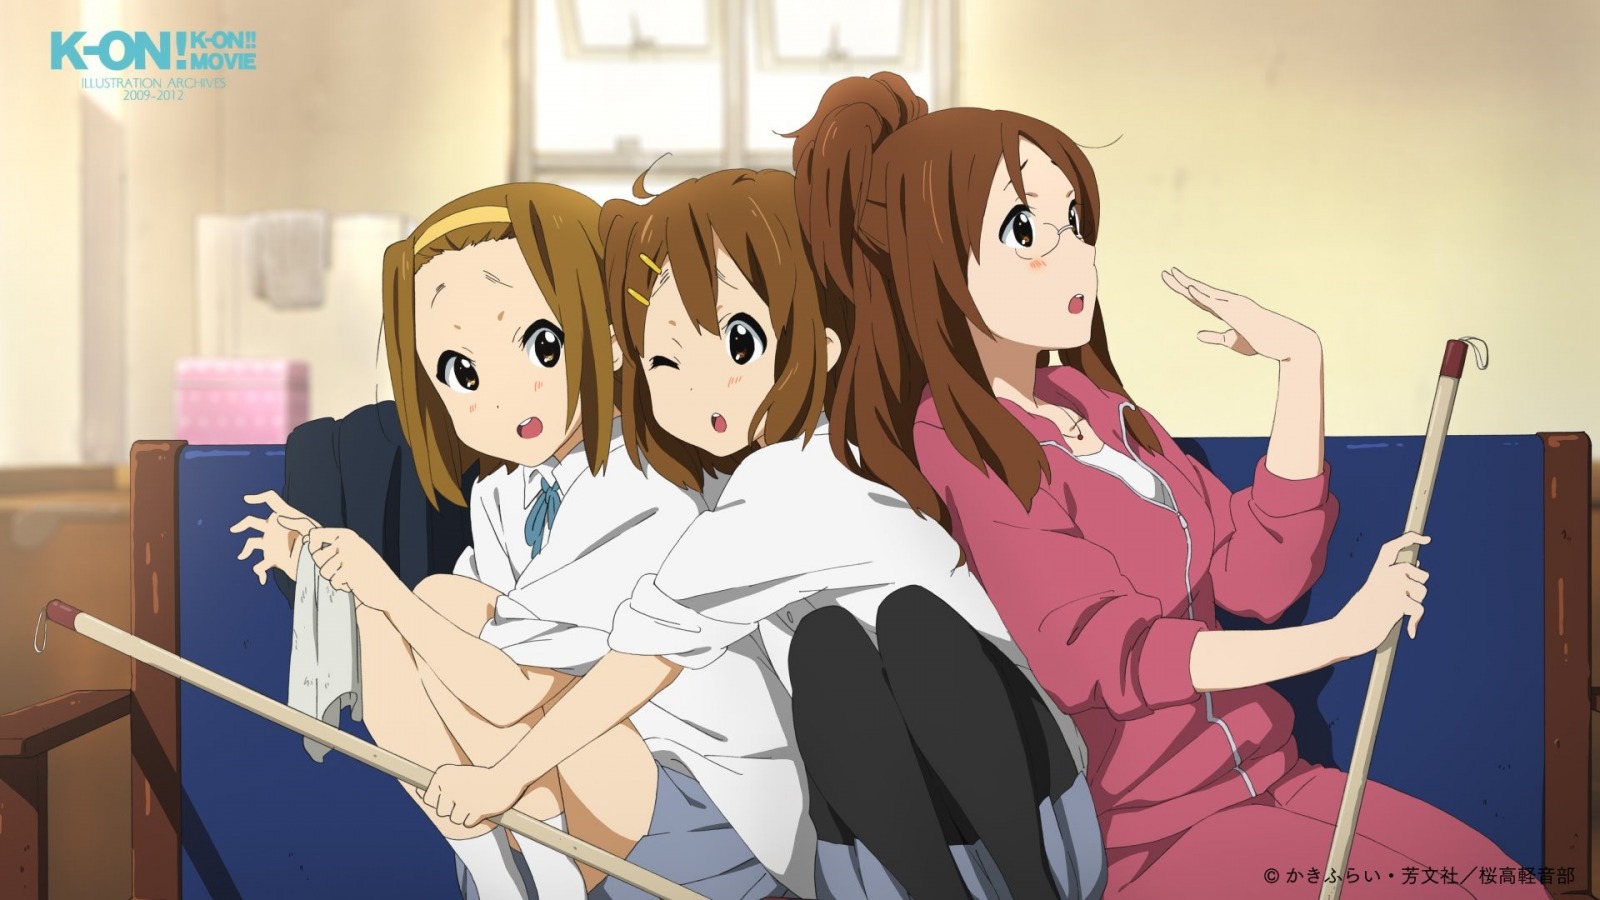 K-ON! IILUSTRATION ARCHIEVES 2009-2012 P.3 [P1]